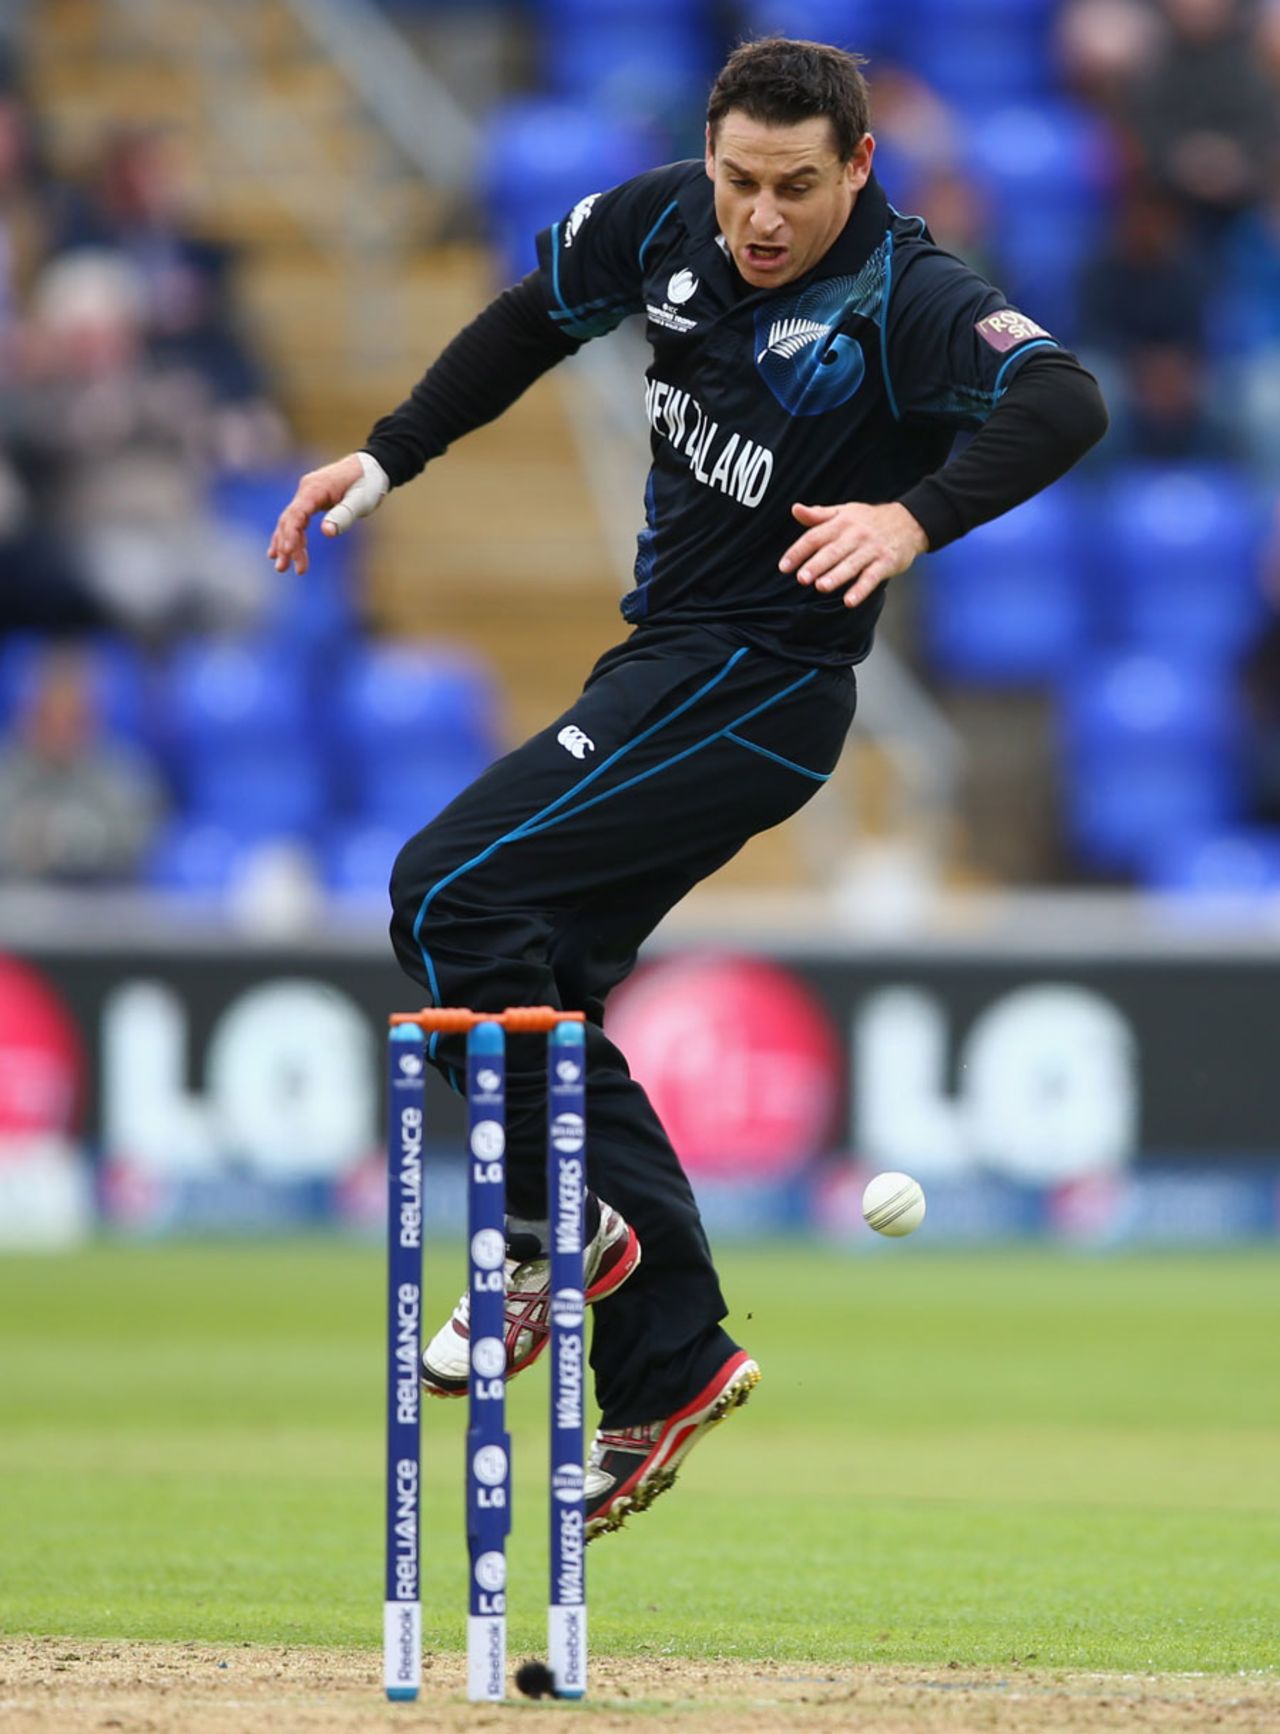 Nathan McCullum gets out of the way of a severely hit ball, England v New Zealand, Champions Trophy, Group A, Cardiff, June 16, 2013